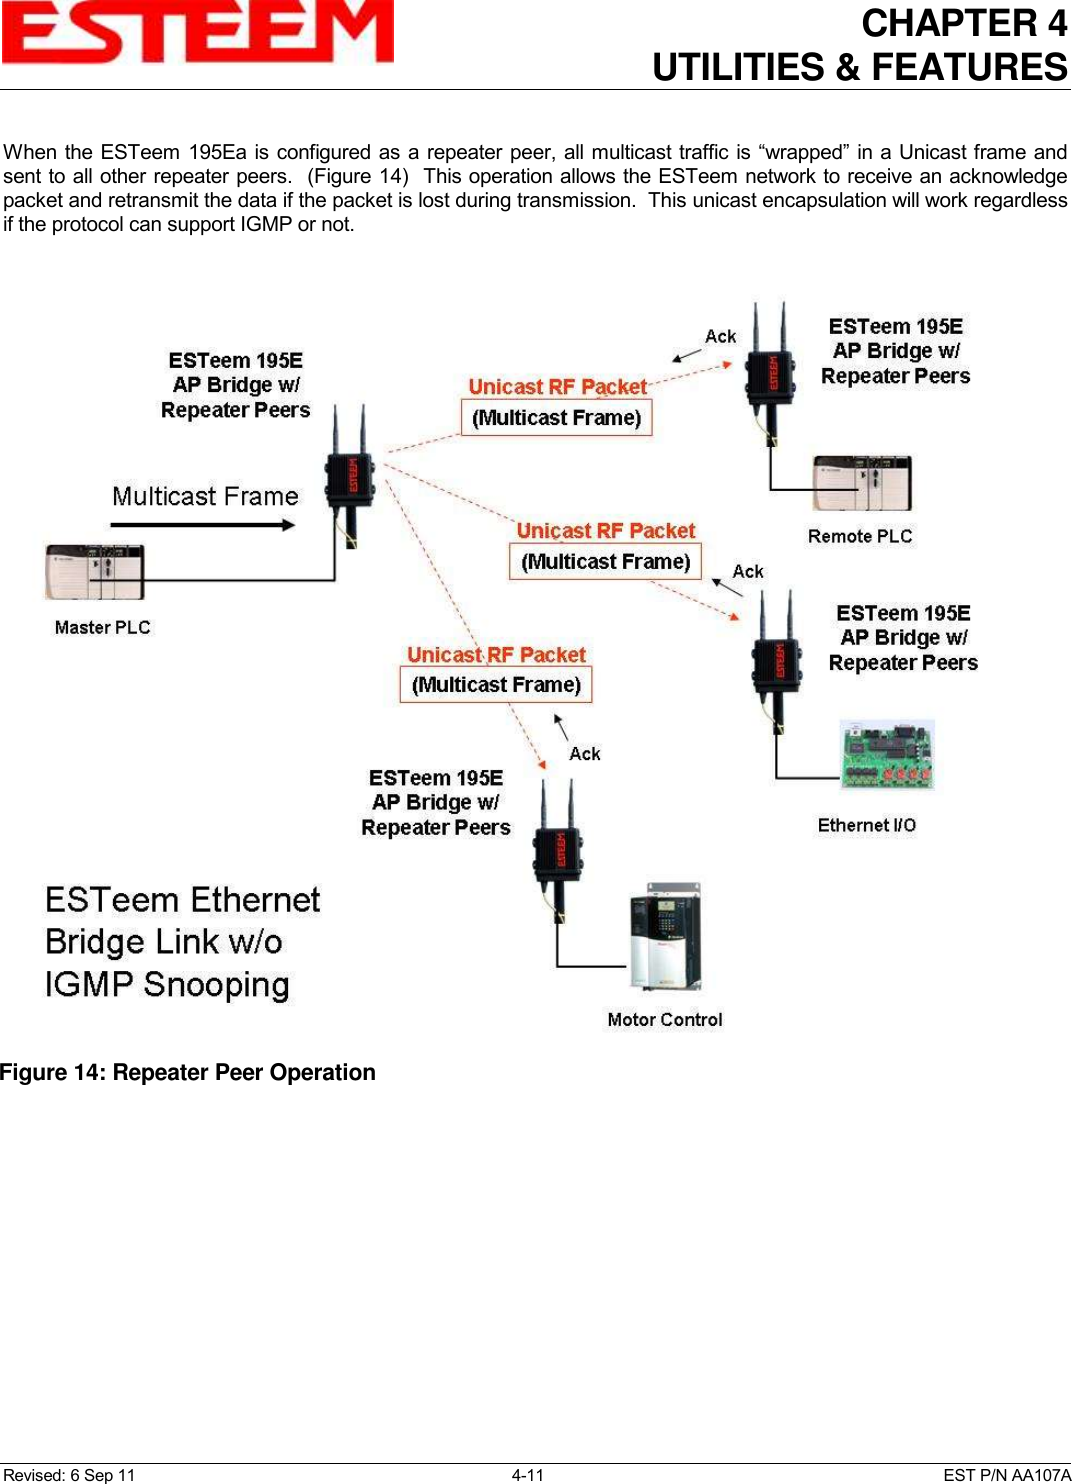 CHAPTER 4   UTILITIES &amp; FEATURES  Revised: 6 Sep 11  4-11  EST P/N AA107A  When the ESTeem  195Ea is configured as a repeater peer, all multicast traffic is “wrapped” in a Unicast frame and sent to all other repeater peers.  (Figure 14)  This operation allows the ESTeem network to receive an acknowledge packet and retransmit the data if the packet is lost during transmission.  This unicast encapsulation will work regardless if the protocol can support IGMP or not.       Figure 14: Repeater Peer Operation  